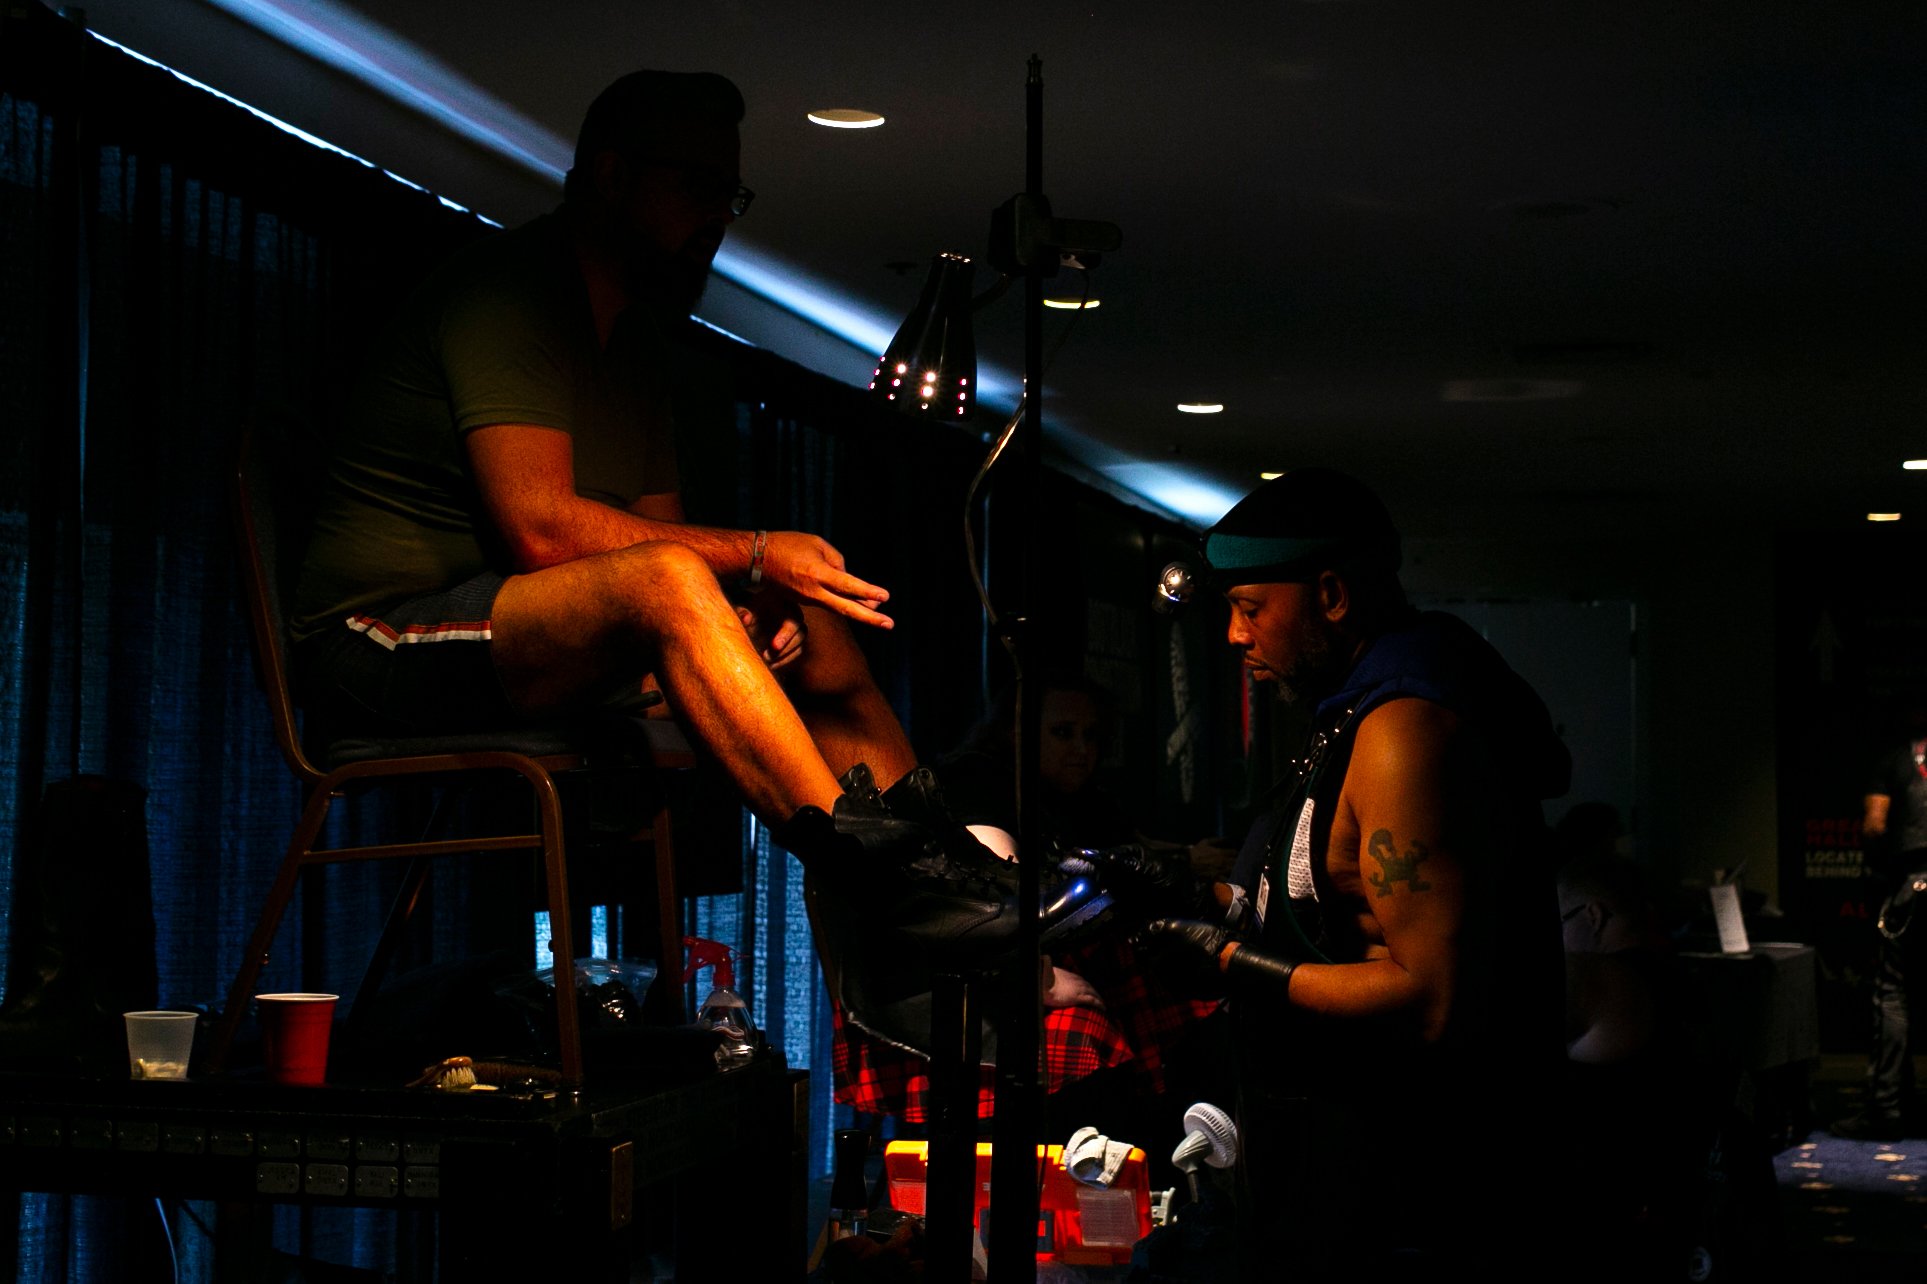  Steele Toe The Bootblack, Northeast Bootblack 2020-21, right, during International Mr. Bootblack 2022, which runs concurrently with International Mr. Leather at The Congress Plaza Hotel.  